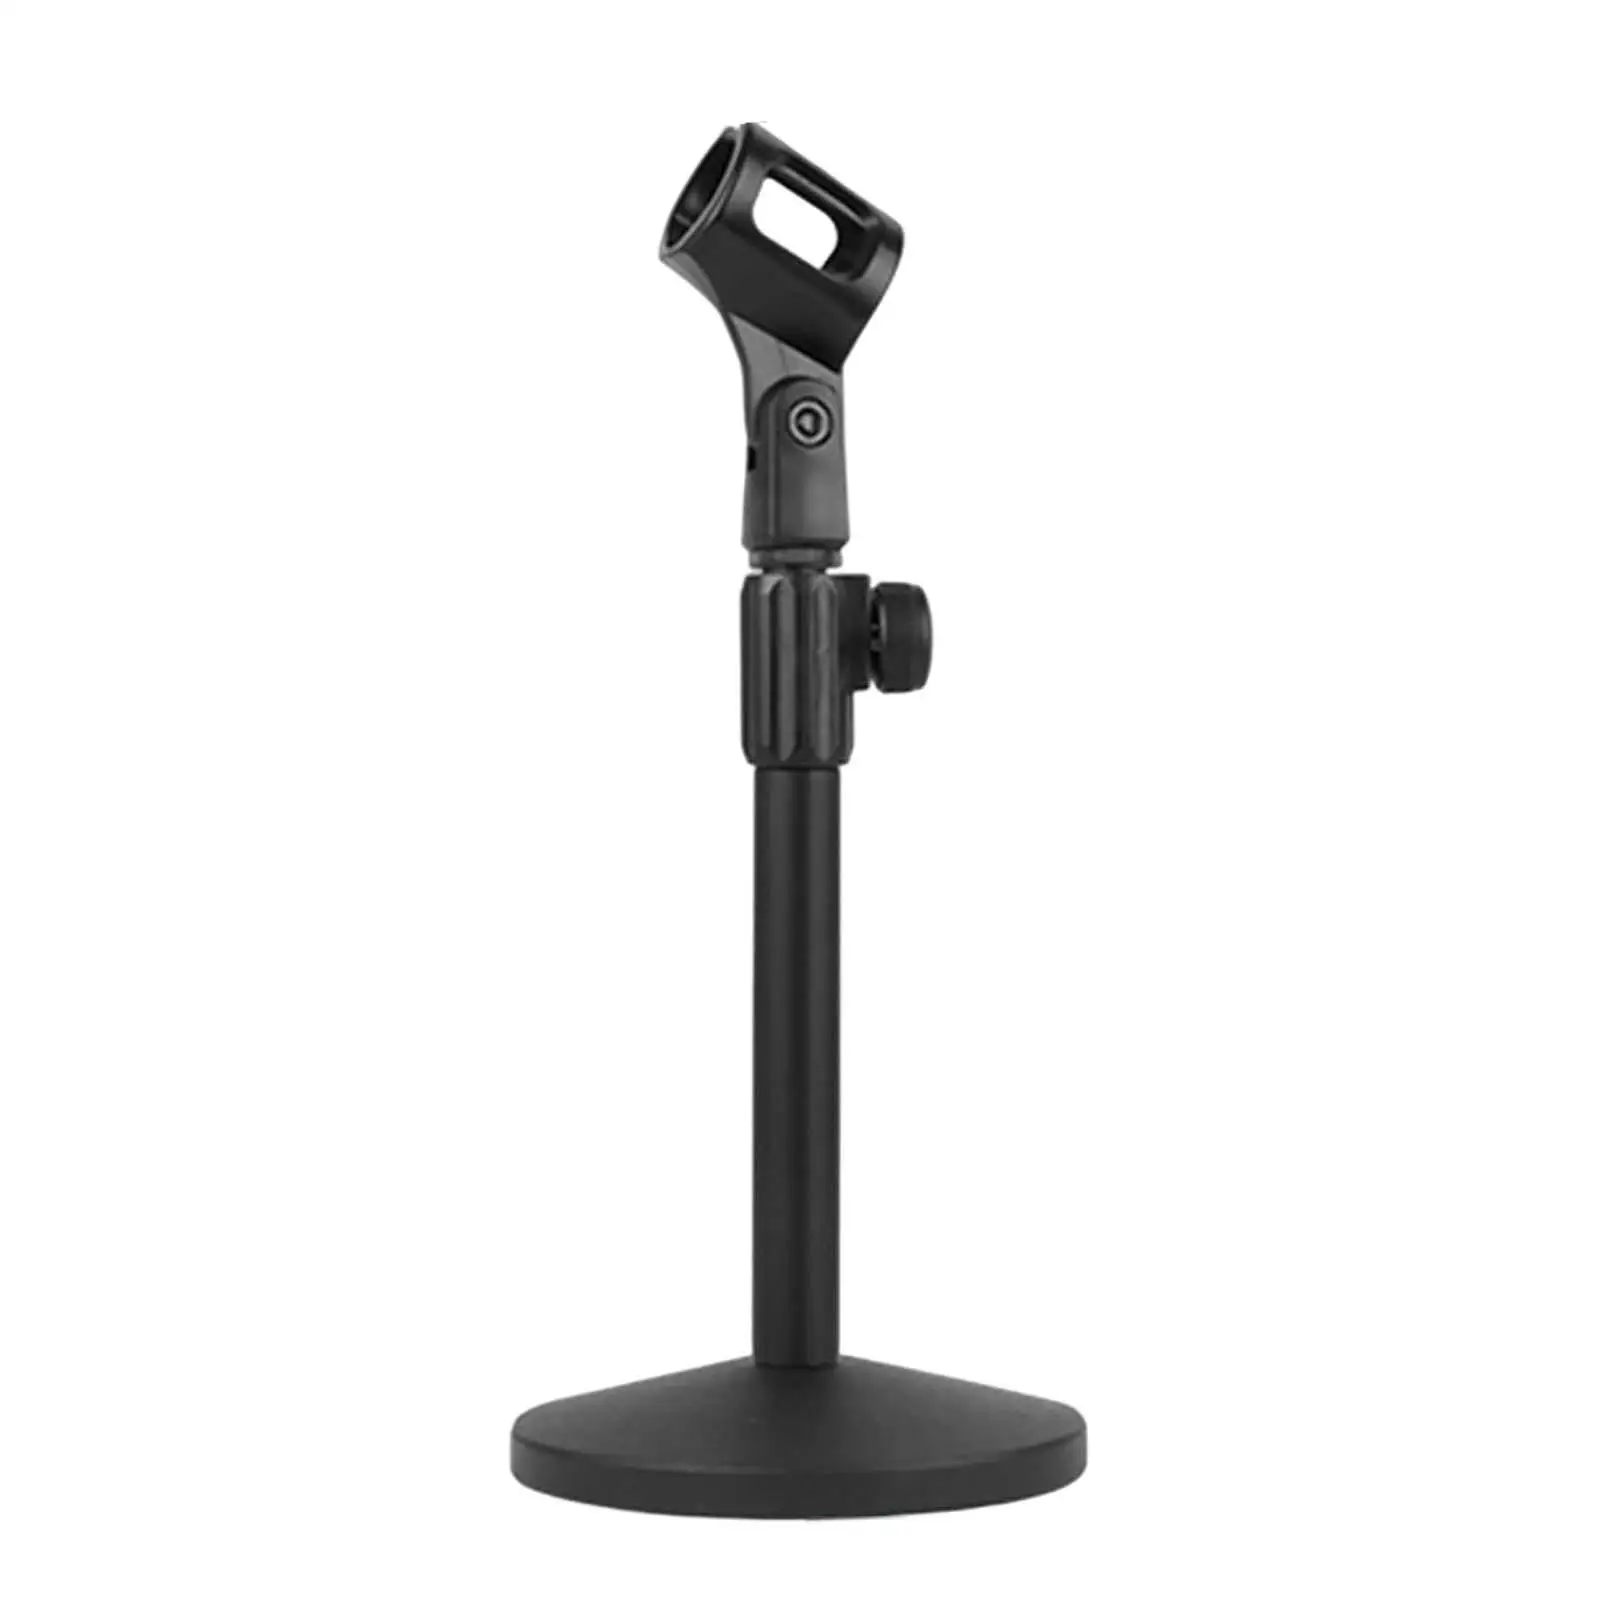 Adjustable Table Mic Stand Portable Durable Metal Desktop Microphone Stand for Concert Singing Conference Home Acoustic Screen